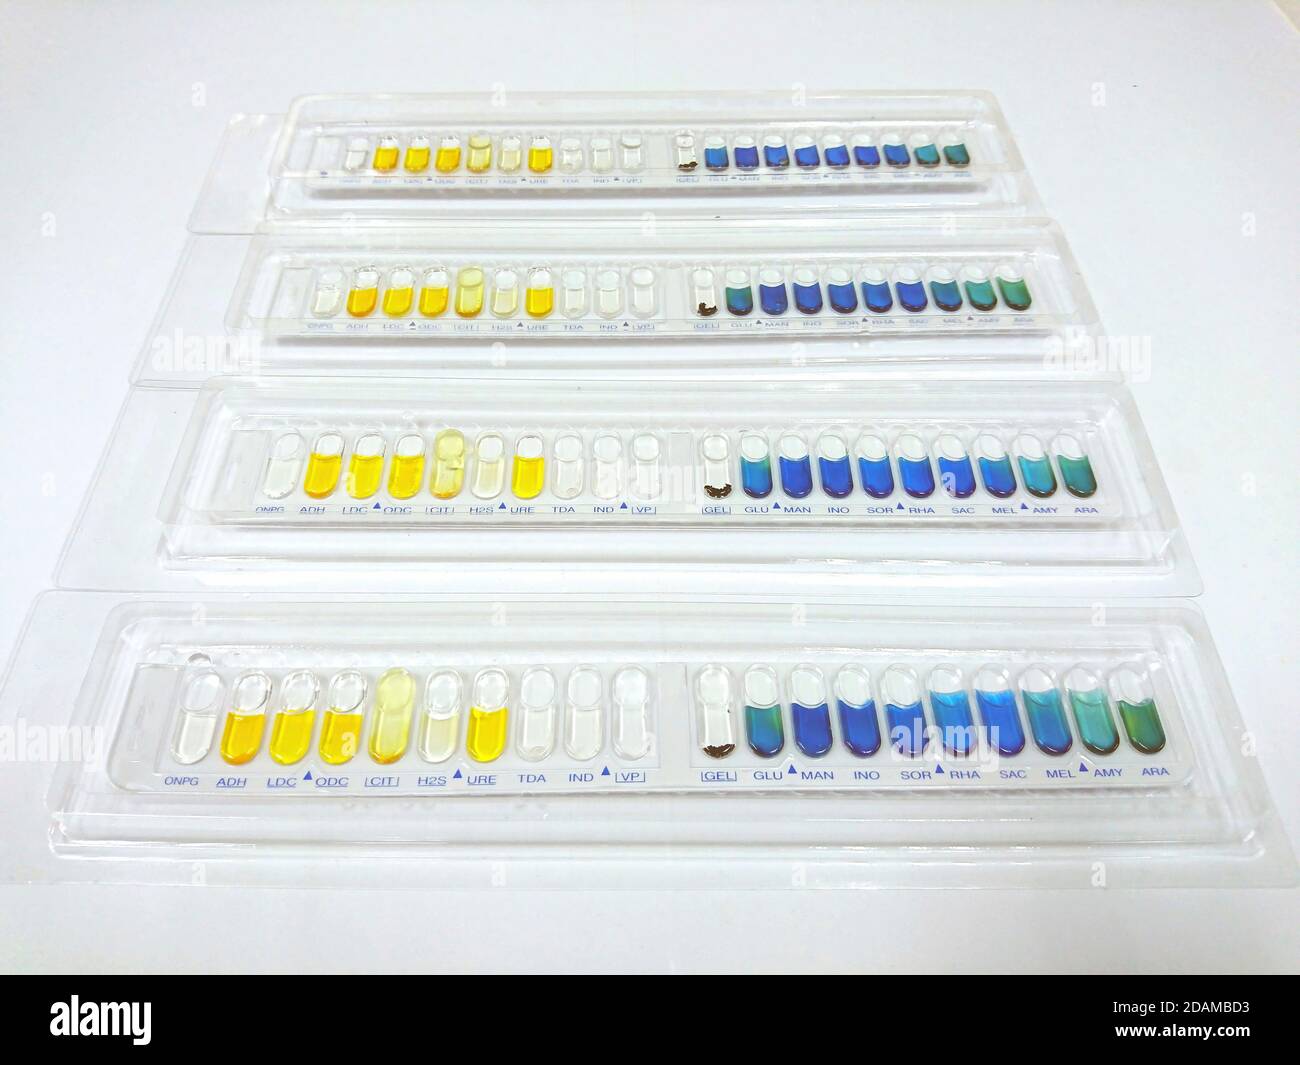 Bacteria identification test kits for the identification of Gram positive and Gram negative bacteria and yeast. Stock Photo